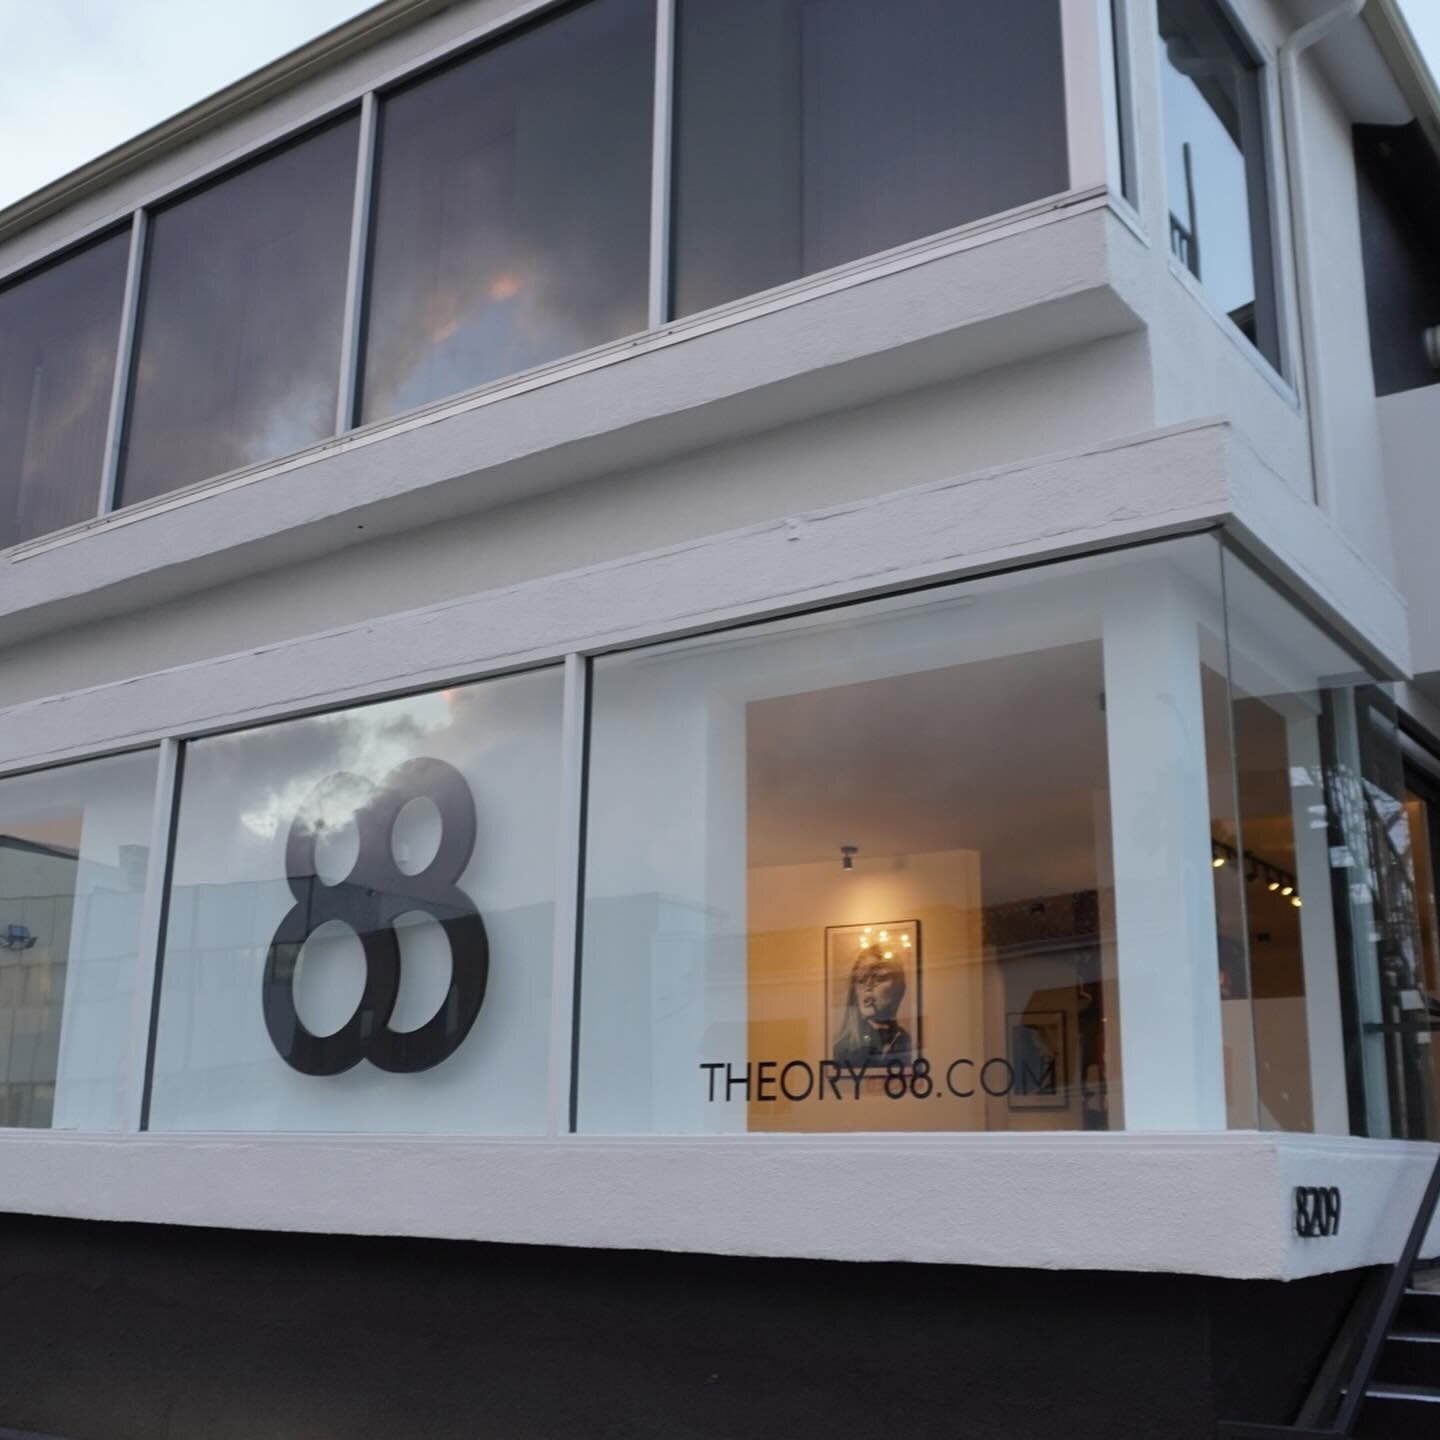 A boutique salon, created with you in mind.

Find us in Los Angeles at 8209 Melrose Ave and online at theory88.com